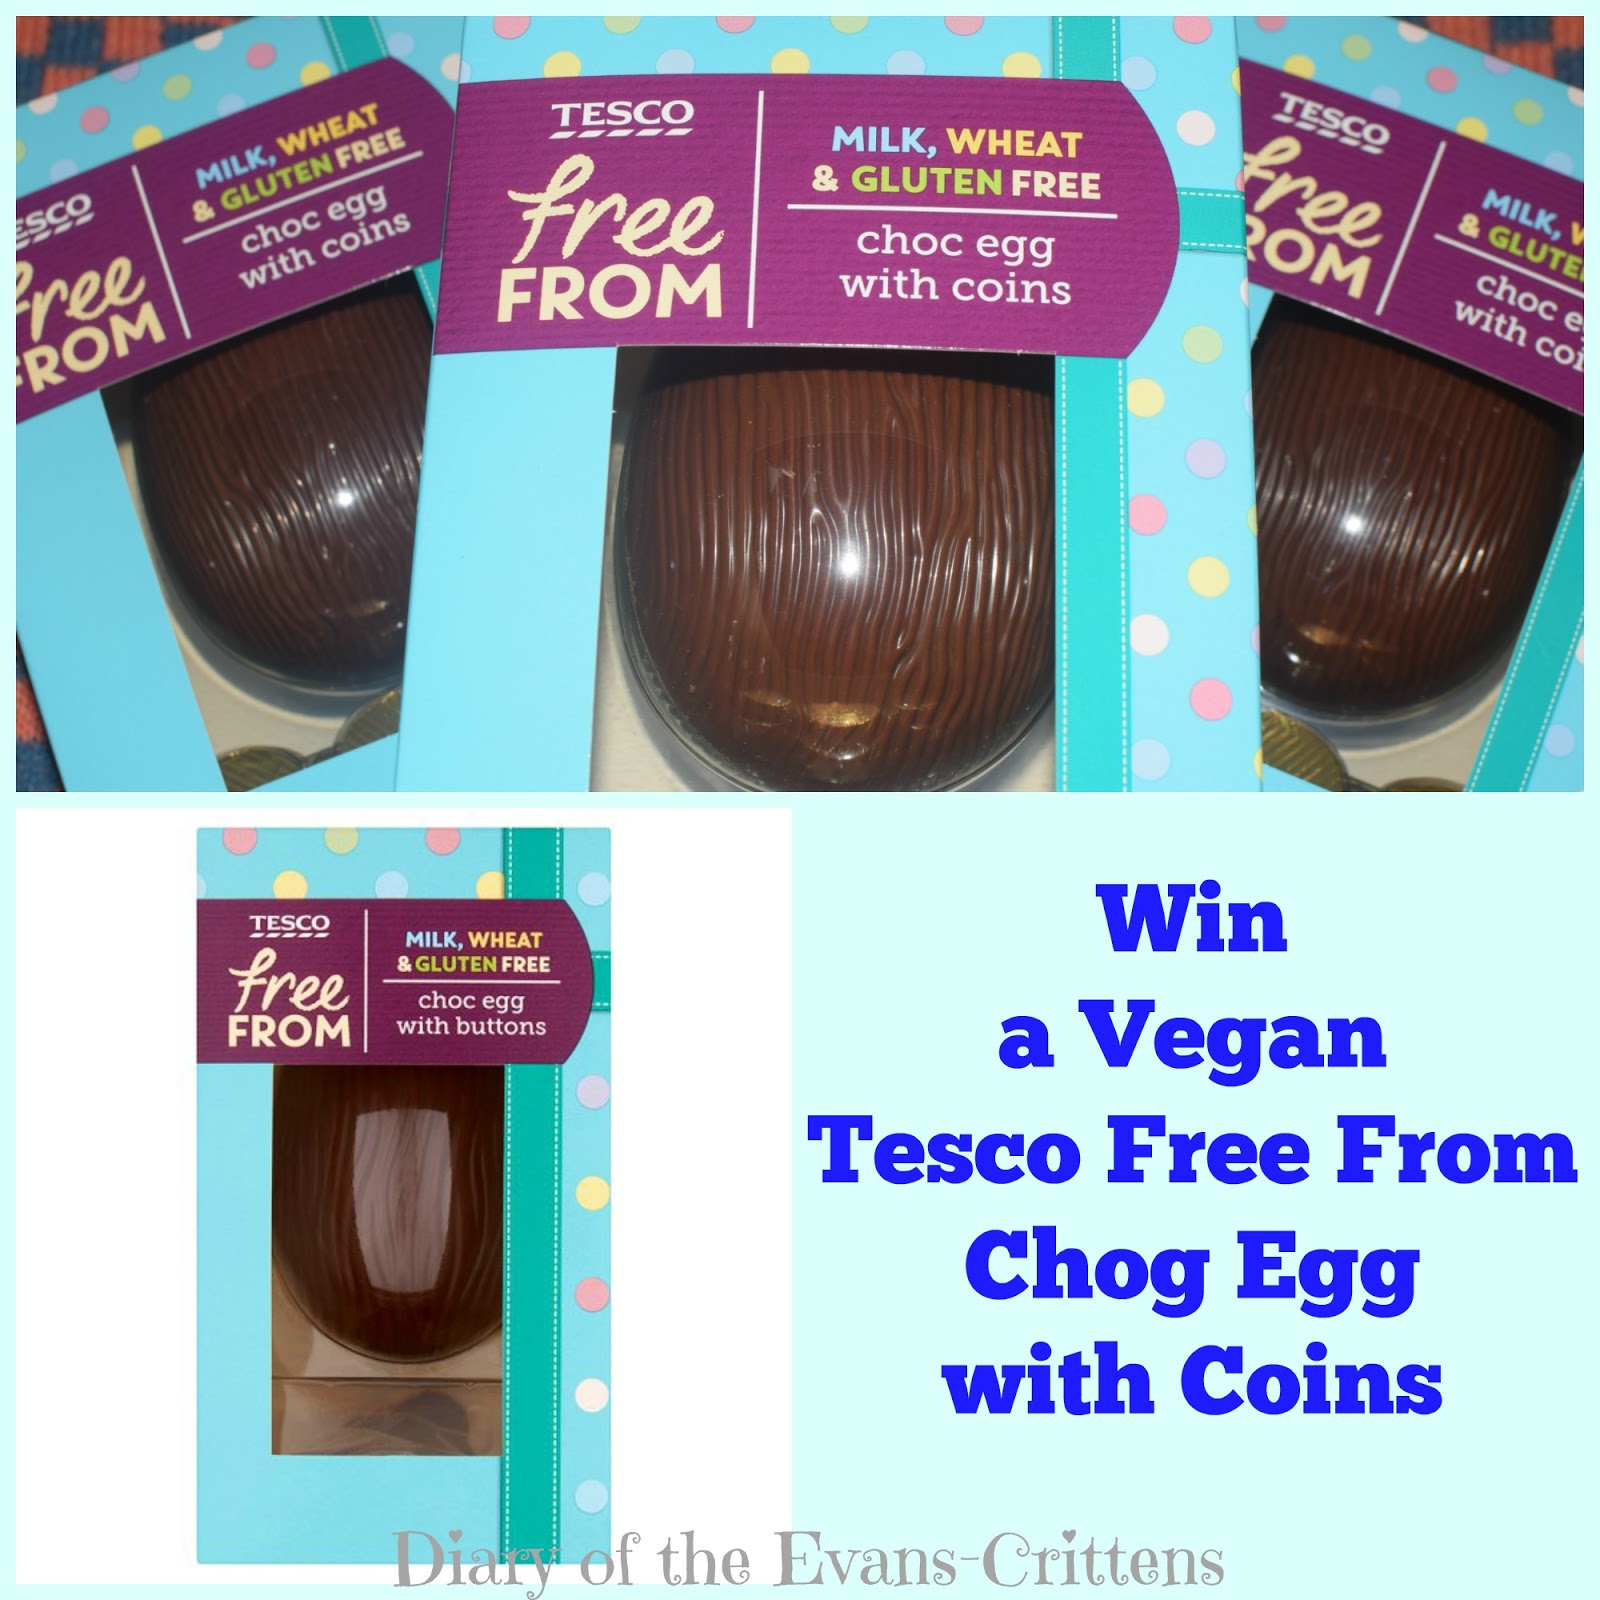 , Food:  Win a Tesco Free From Choc Egg With Coins